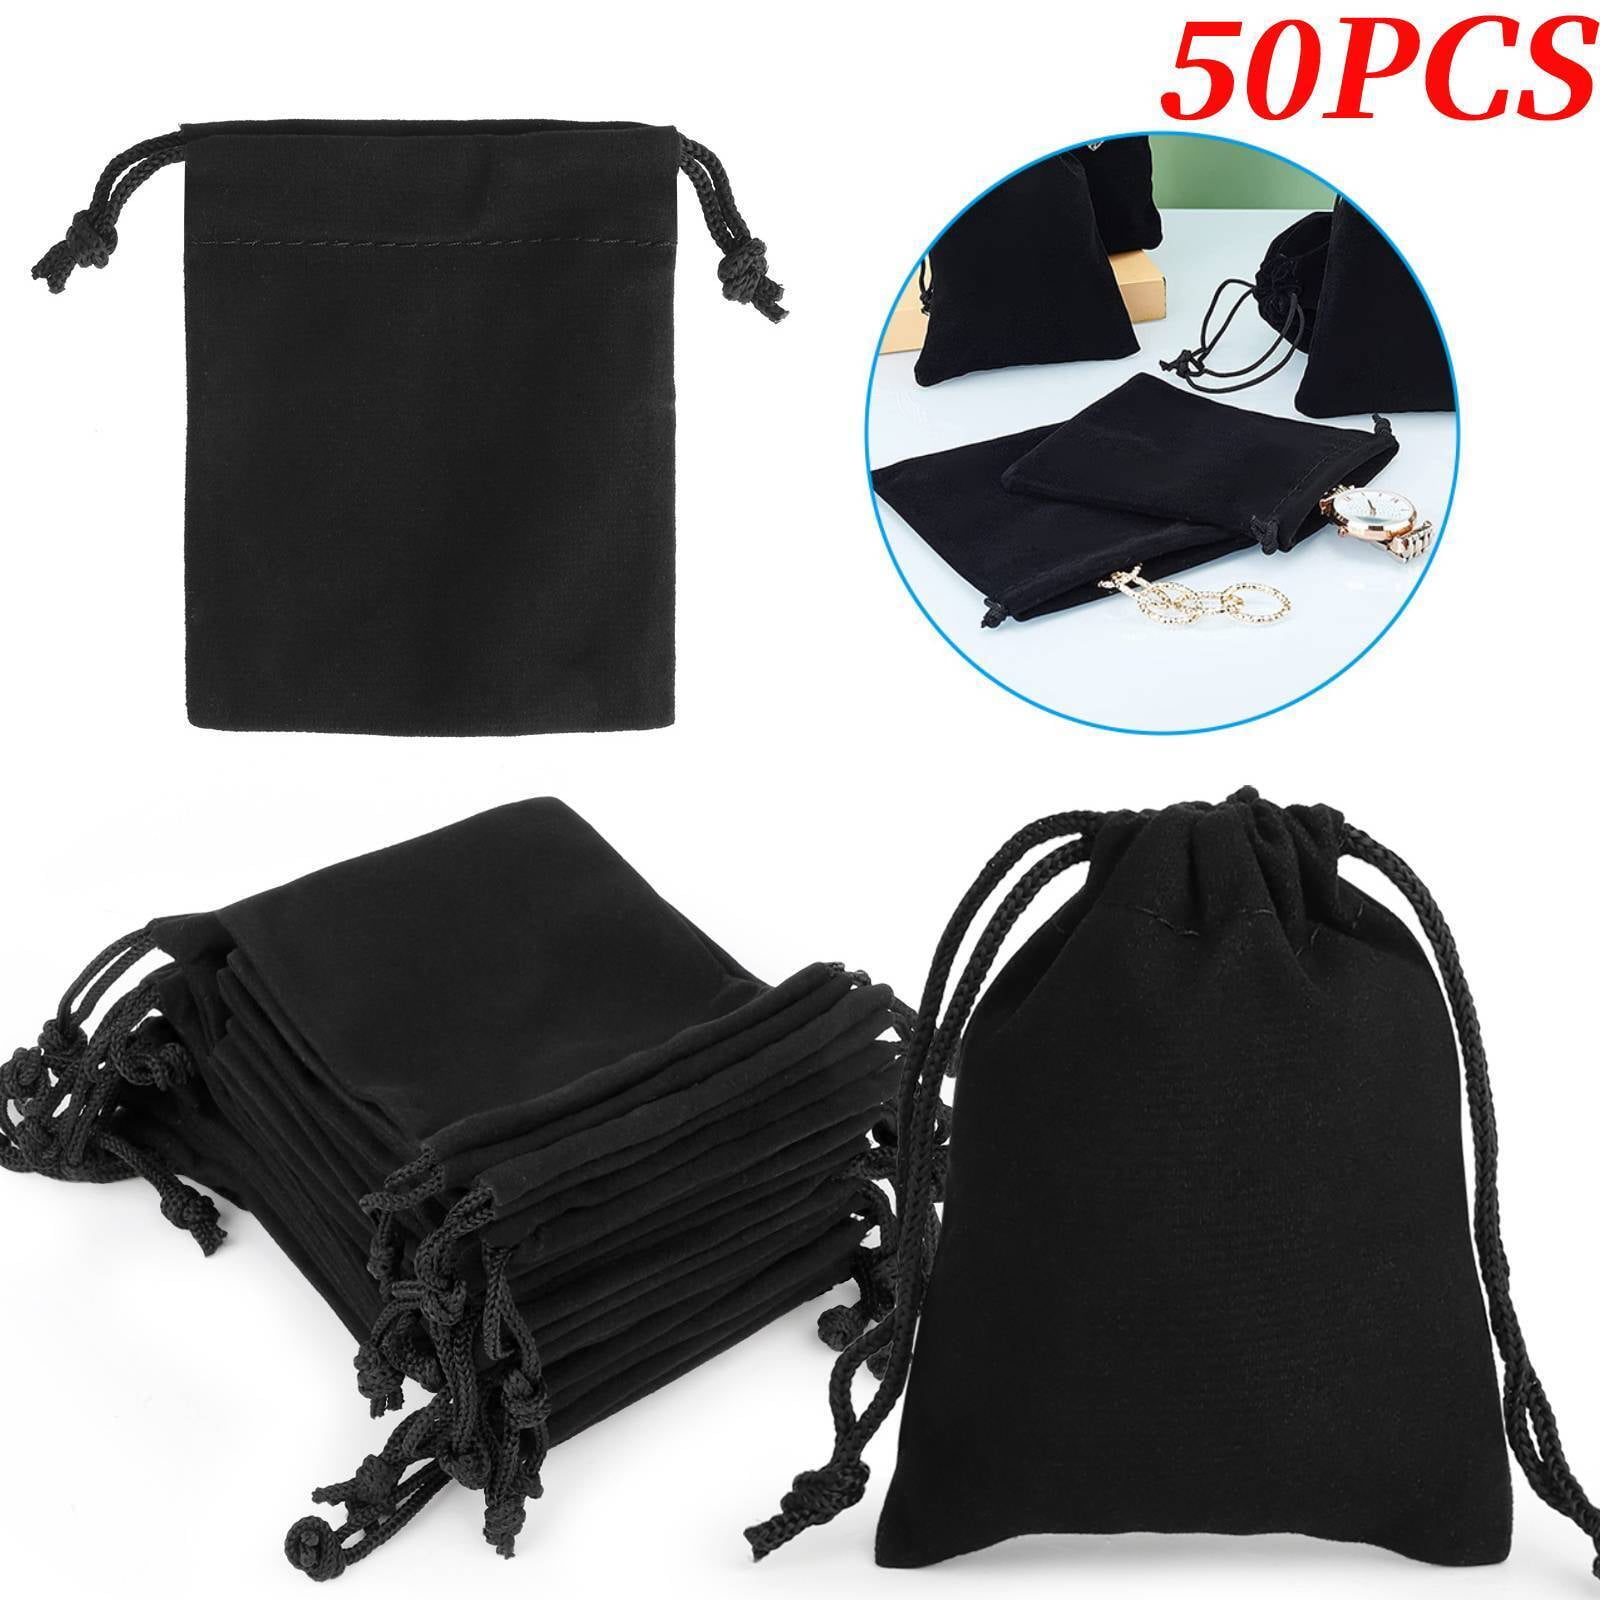 Wraps Black Velour Jewelry Bags with Drawstrings 3x4 100 Pack